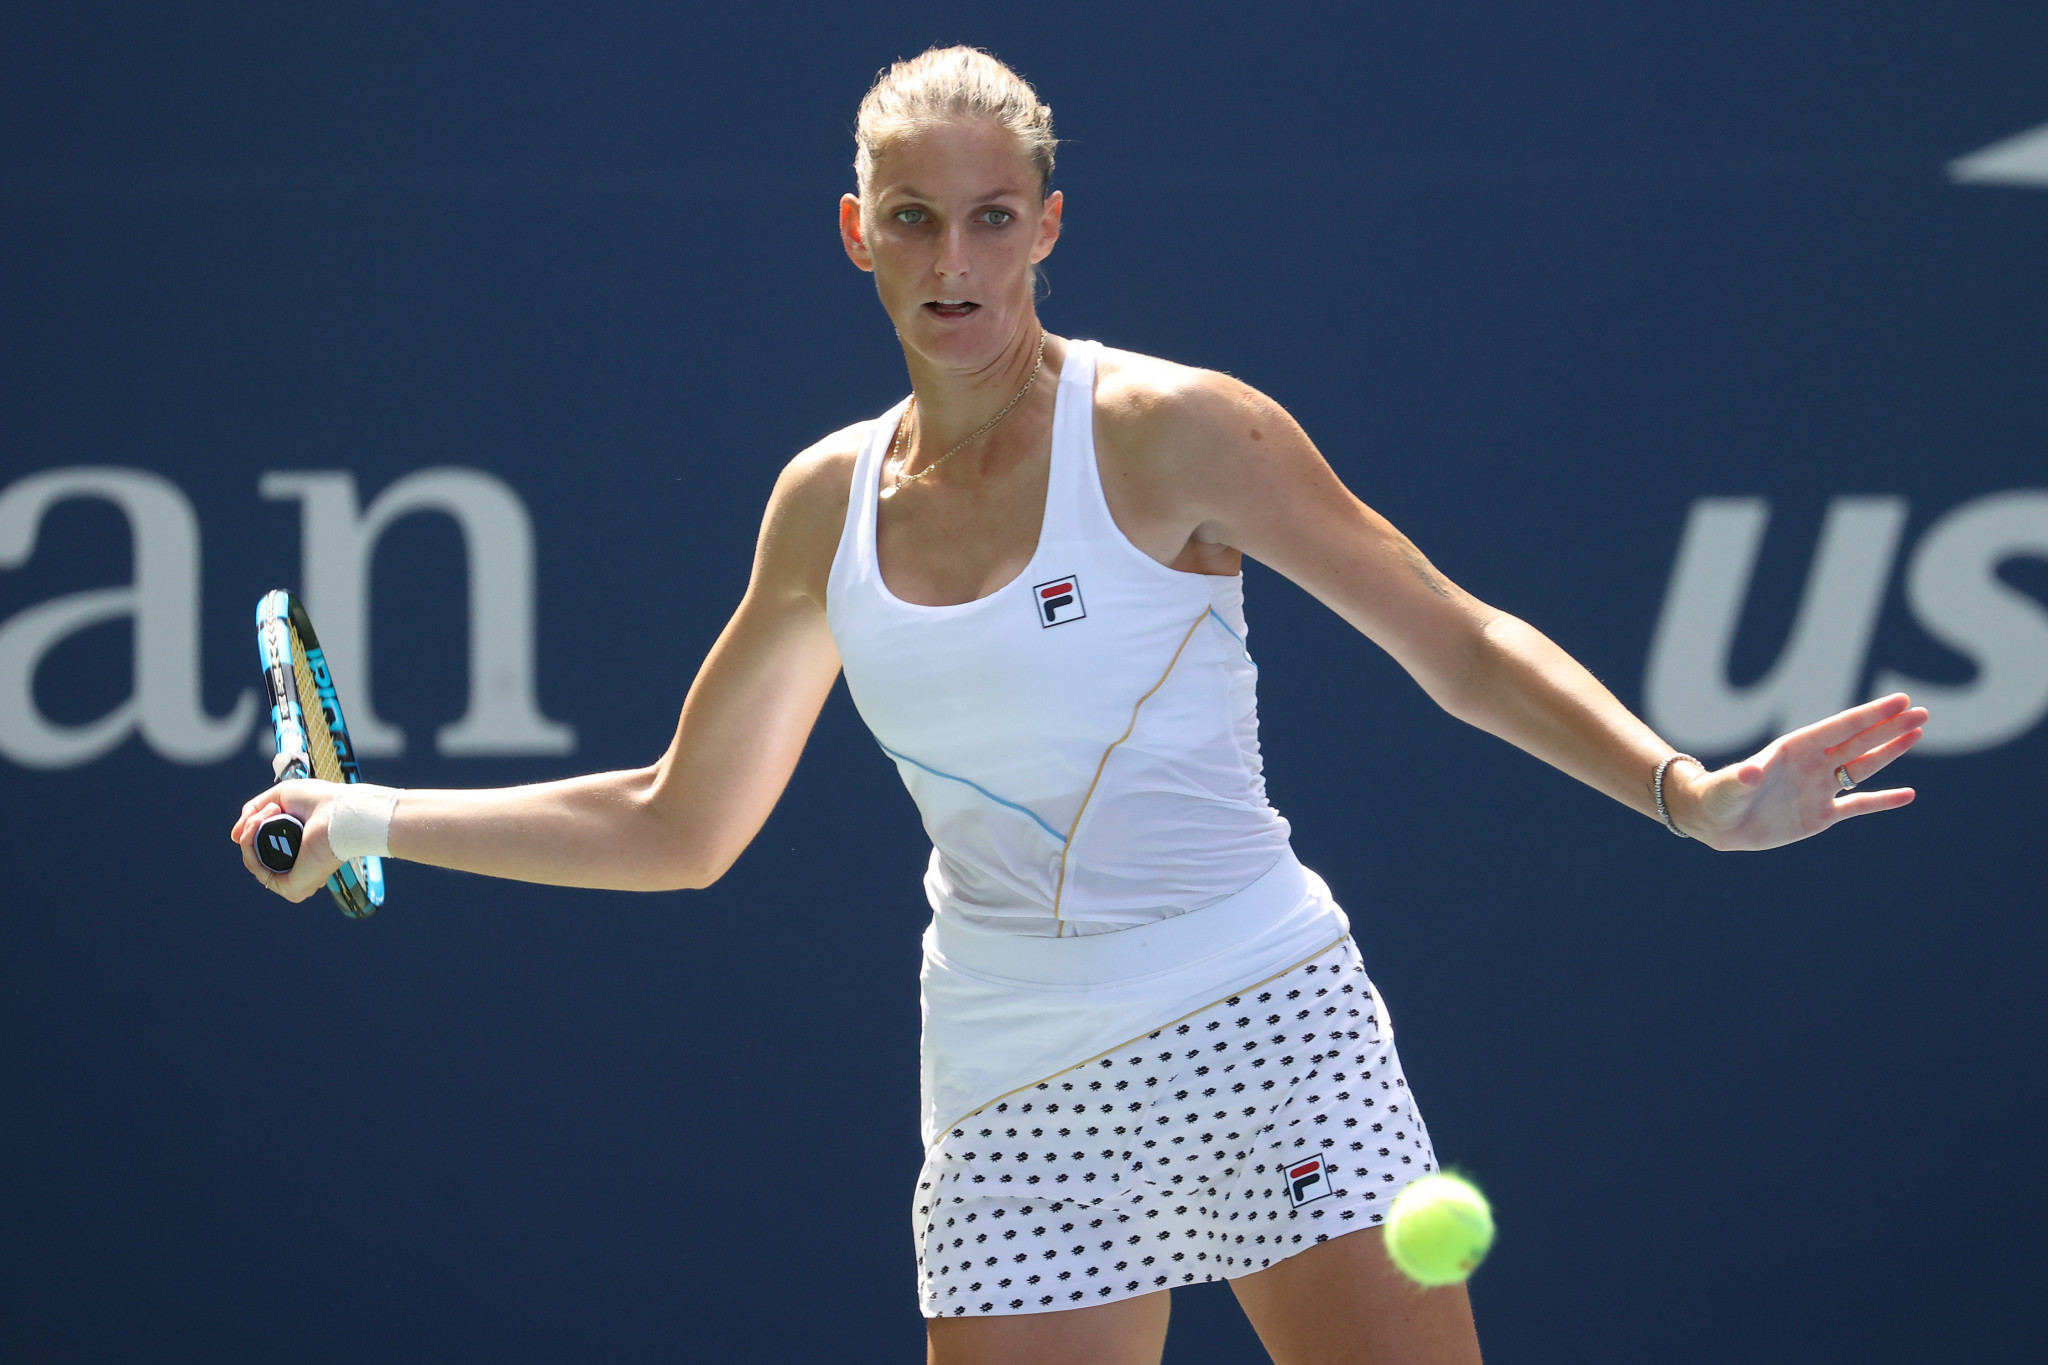 Fourth seed Karolina Pliskova of the Czech Republic triumphed in straight sets in her first round encounter in New York ©Getty Images